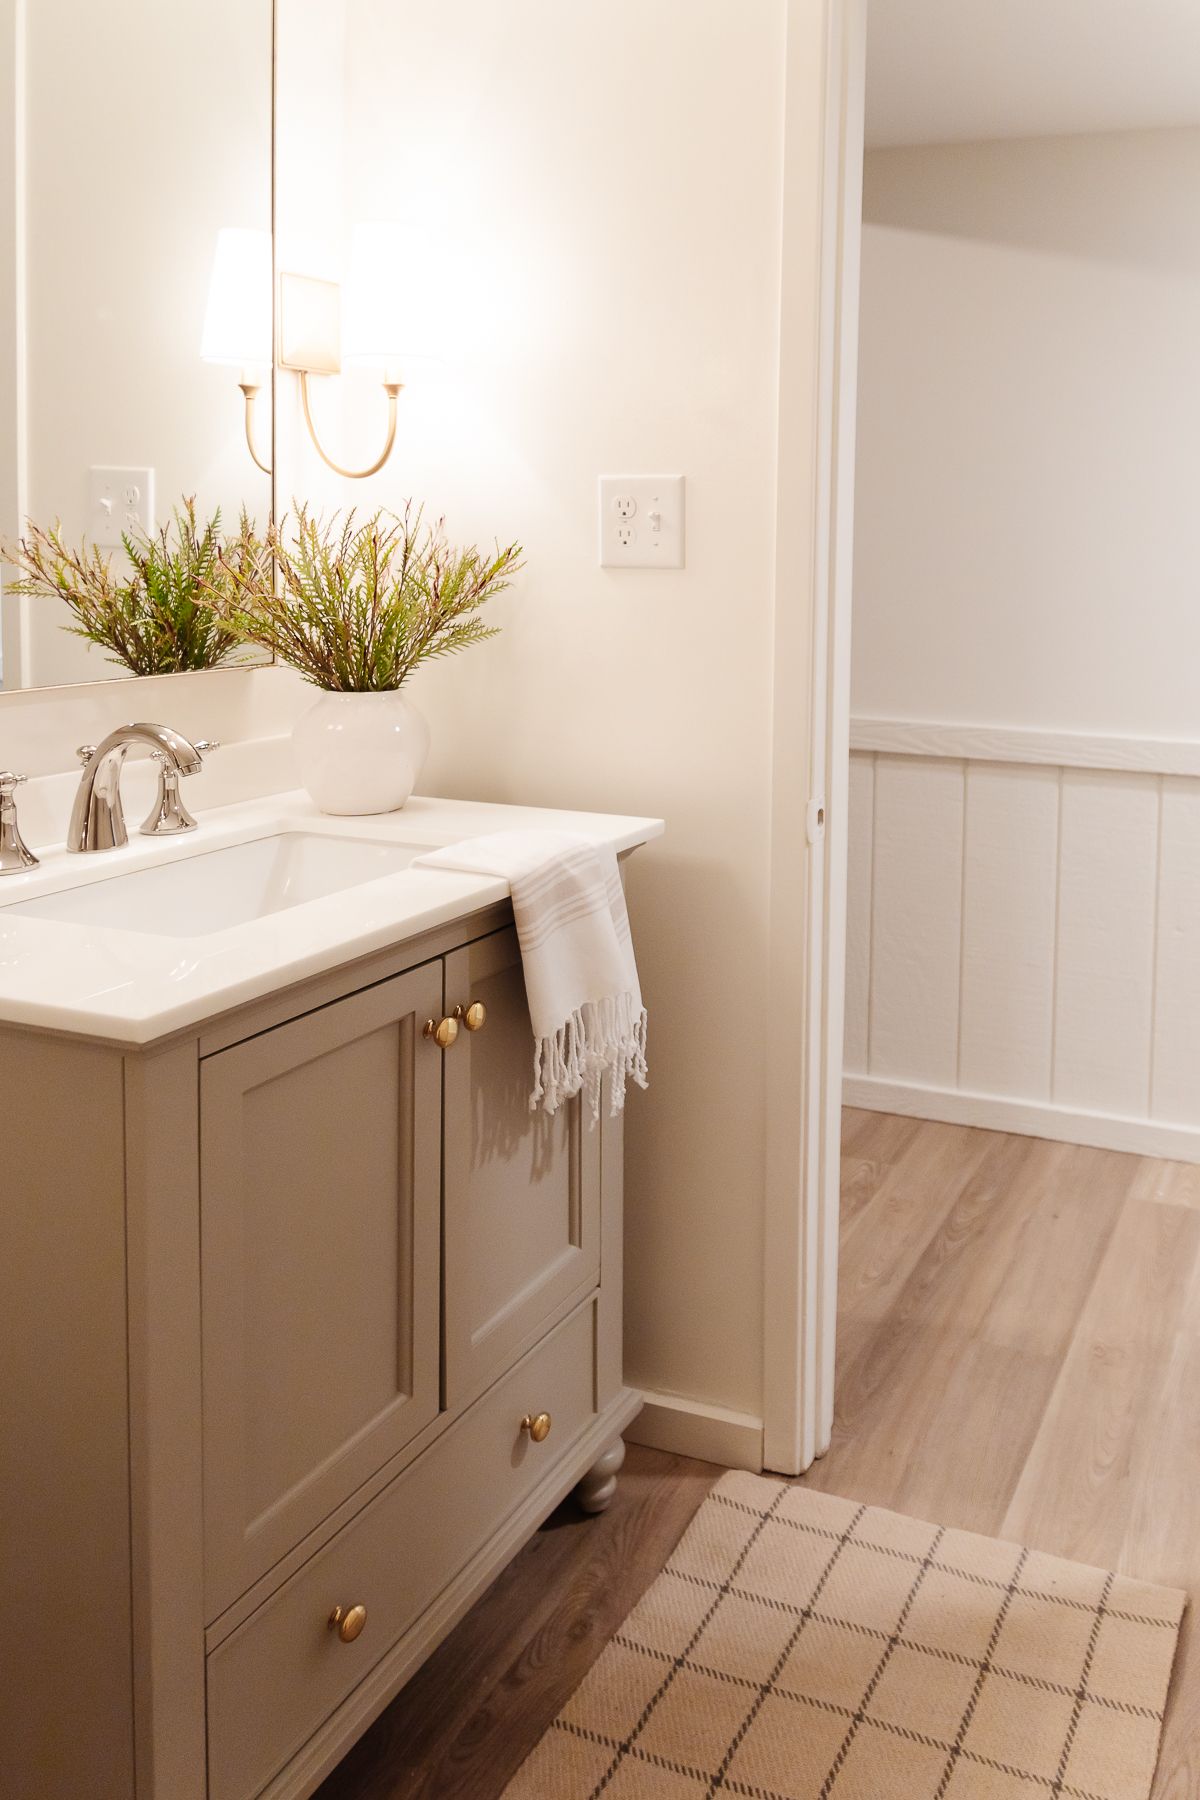 A cream bathroom with a vanity painted in a mushroom paint color